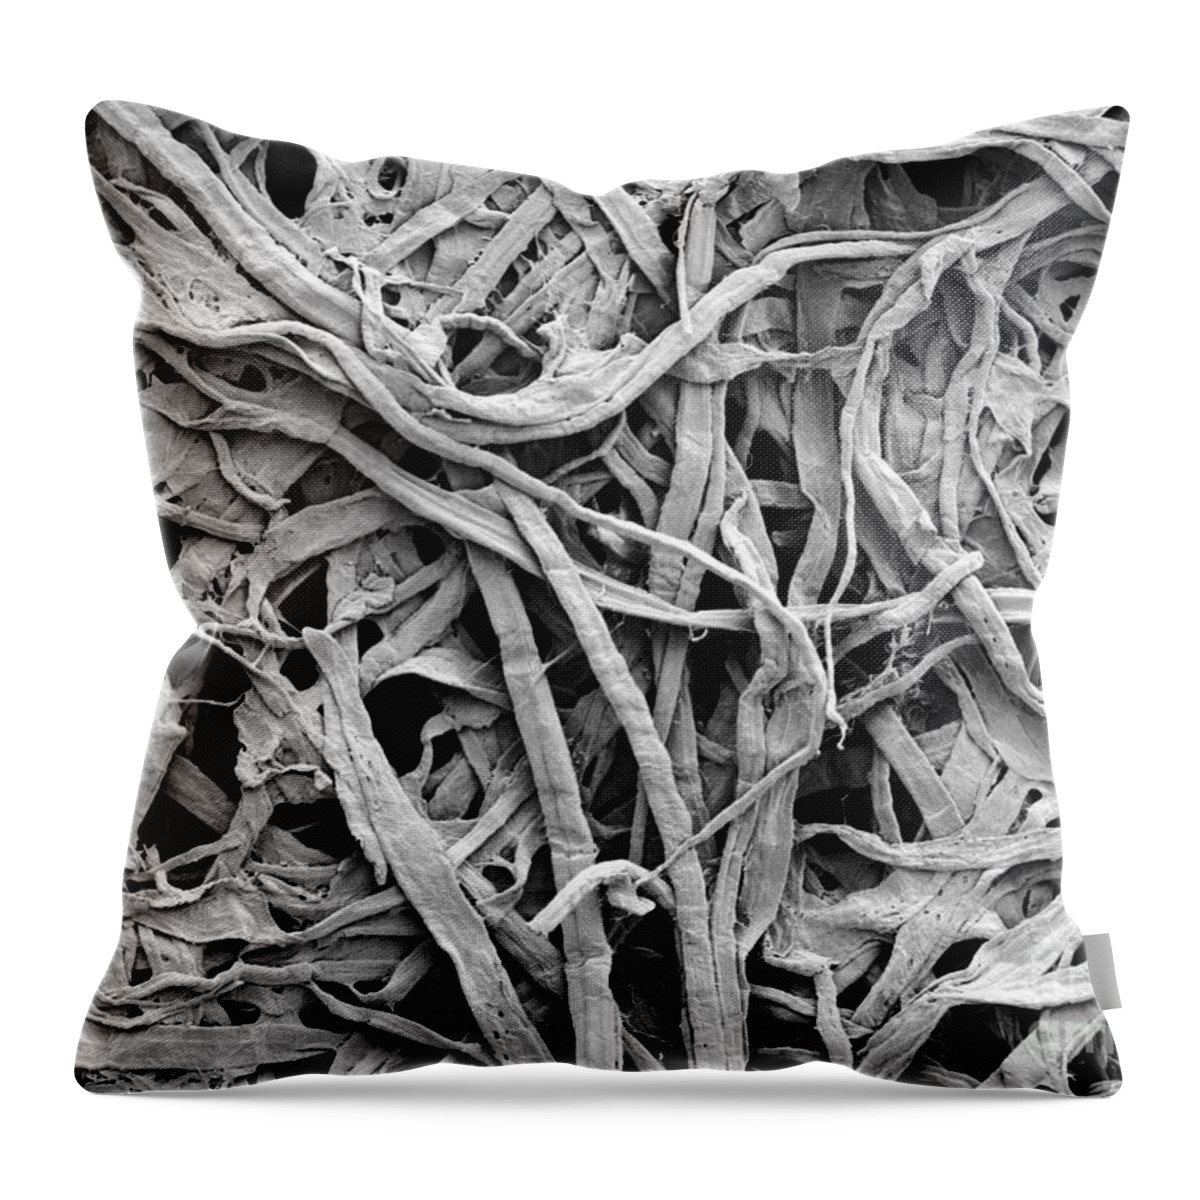 Cellulose Throw Pillow featuring the photograph Cellulose Fibers In A Paper Towel #1 by Scimat